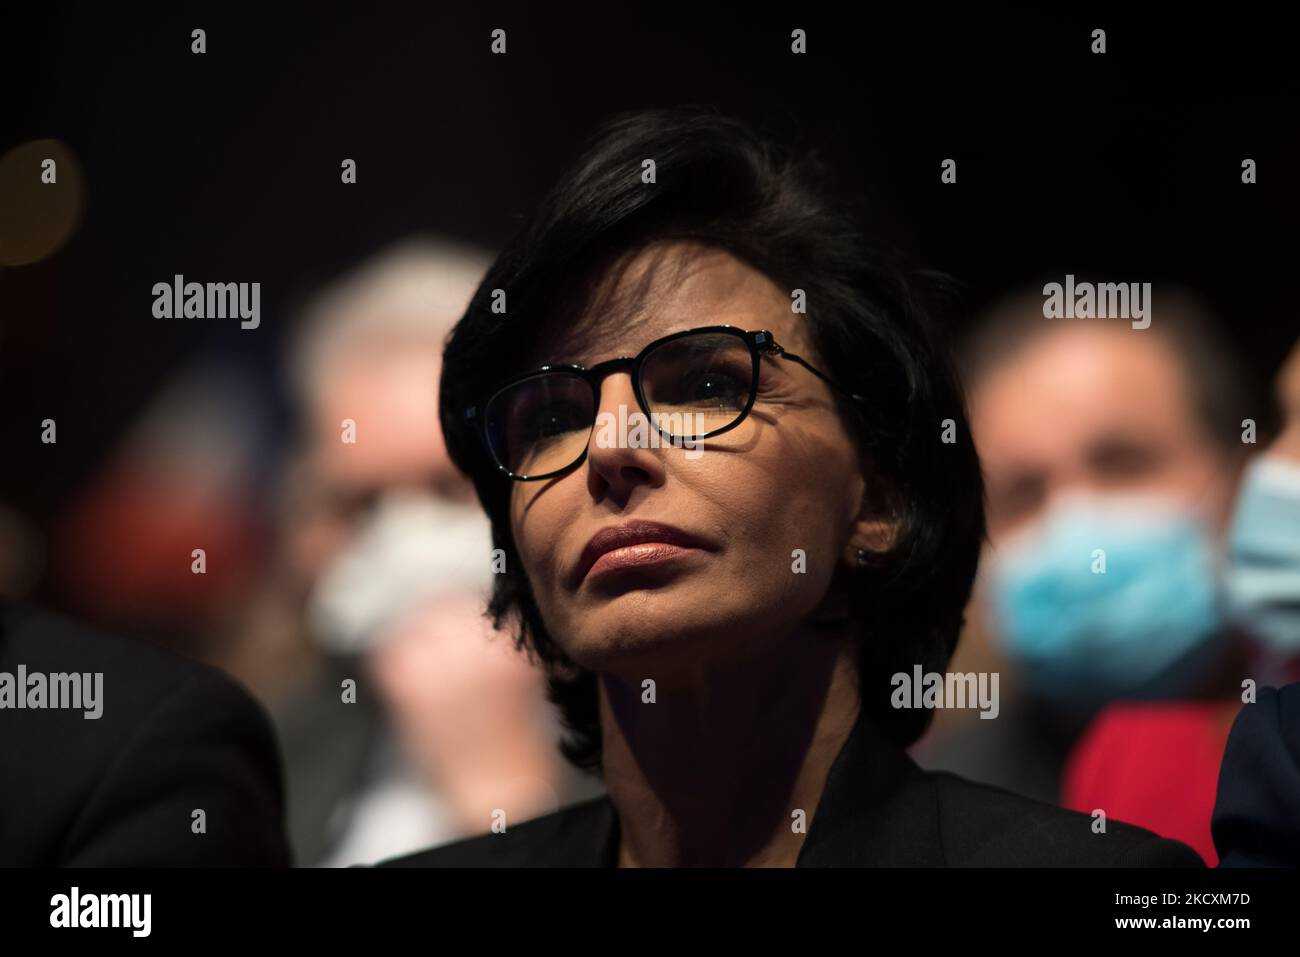 Rachida Dati, former member of the European Parliament and former spokesperson for Nicolas Sarkozy, during the meeting of Valerie Pecresse's right wing at the Maison de la Mutualité, in Paris, 11 December, 2021. (Photo by Andrea Savorani Neri/NurPhoto) Stock Photo